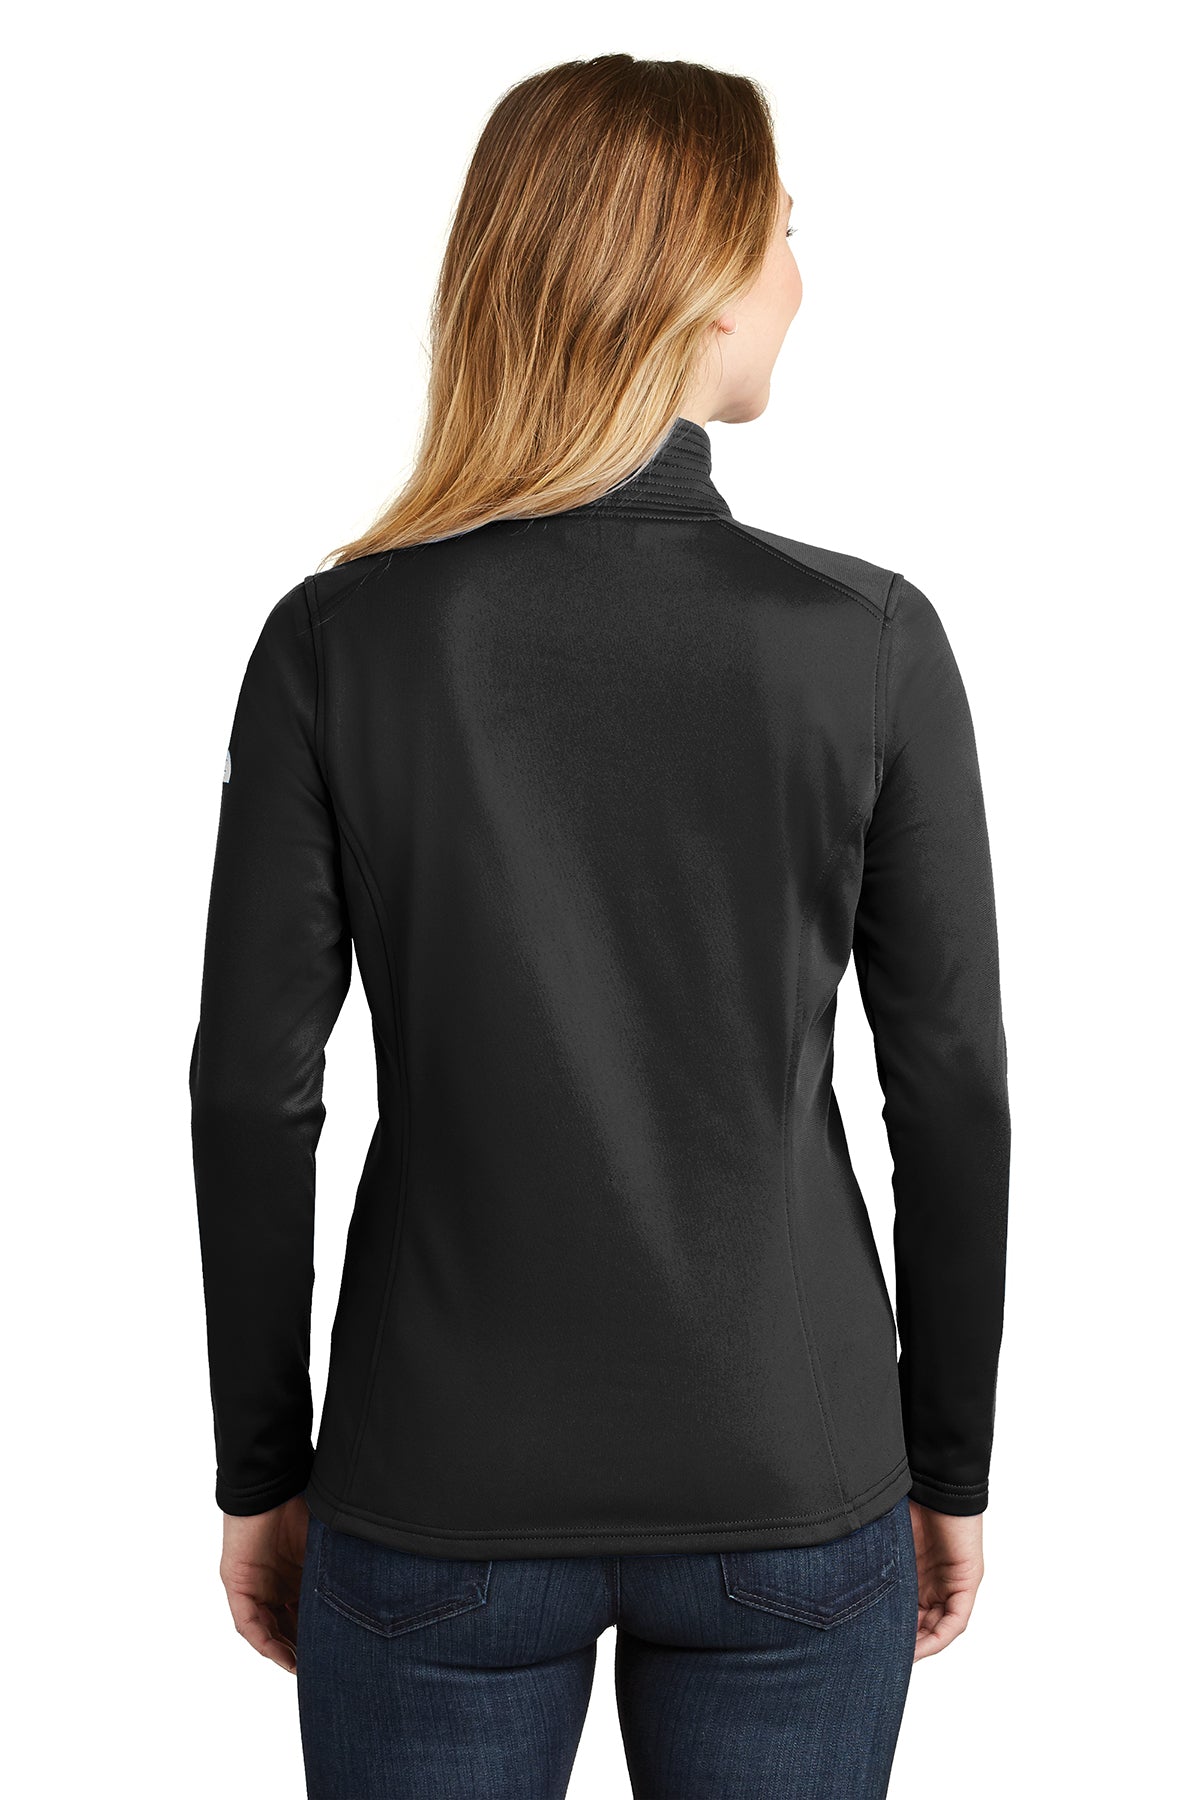 FiA The North Face Ladies Tech 1/4-Zip Fleece - Made to Order